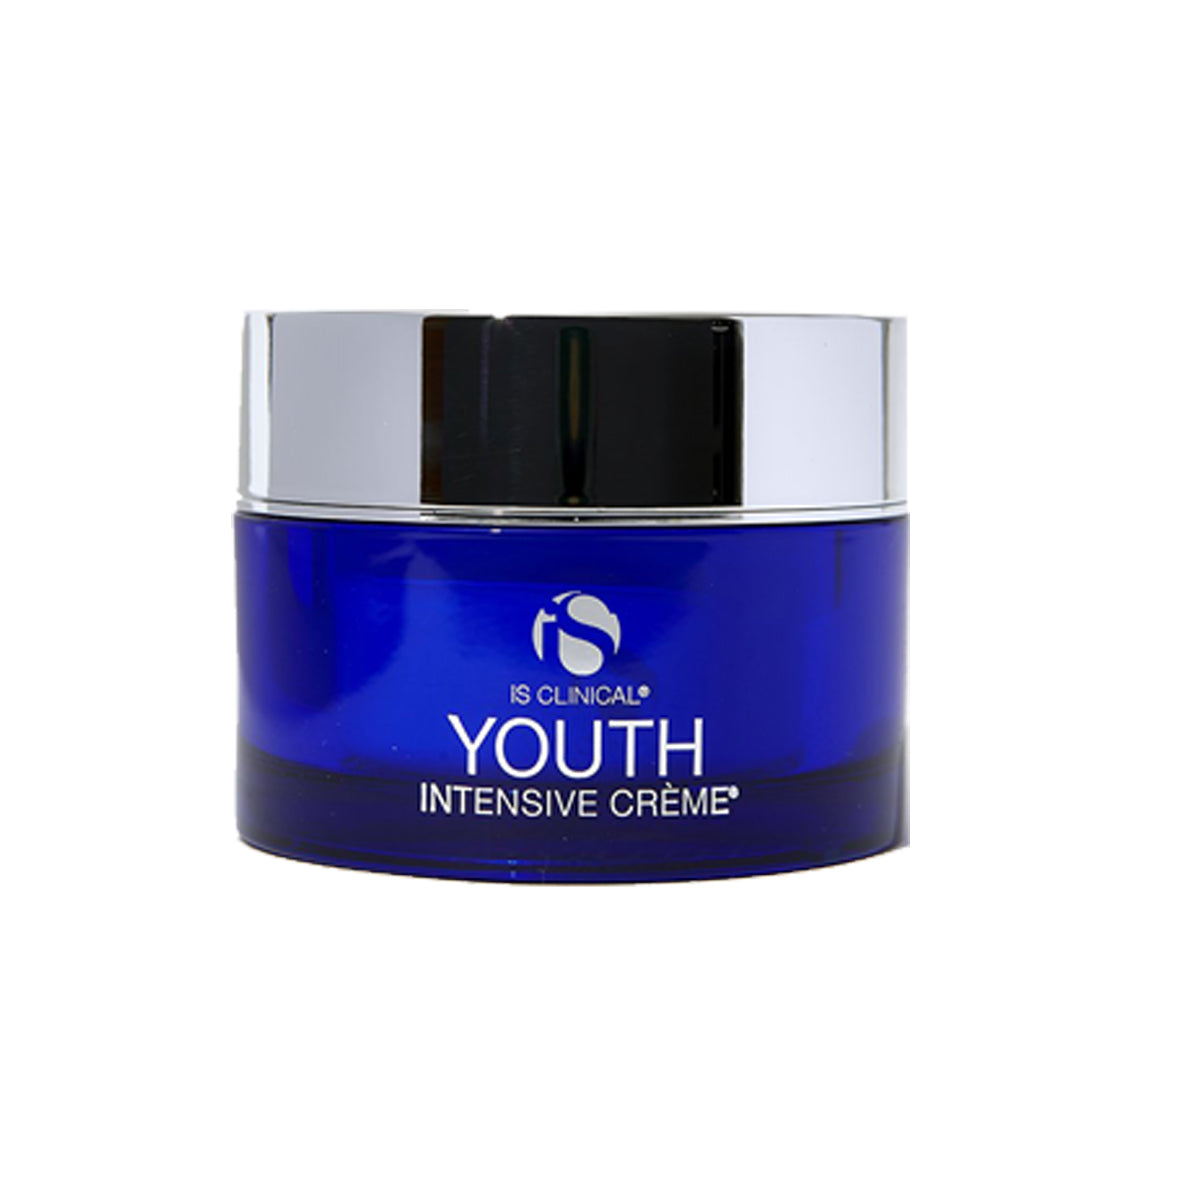 iS Clinical Youth Intensive Creme (50g)